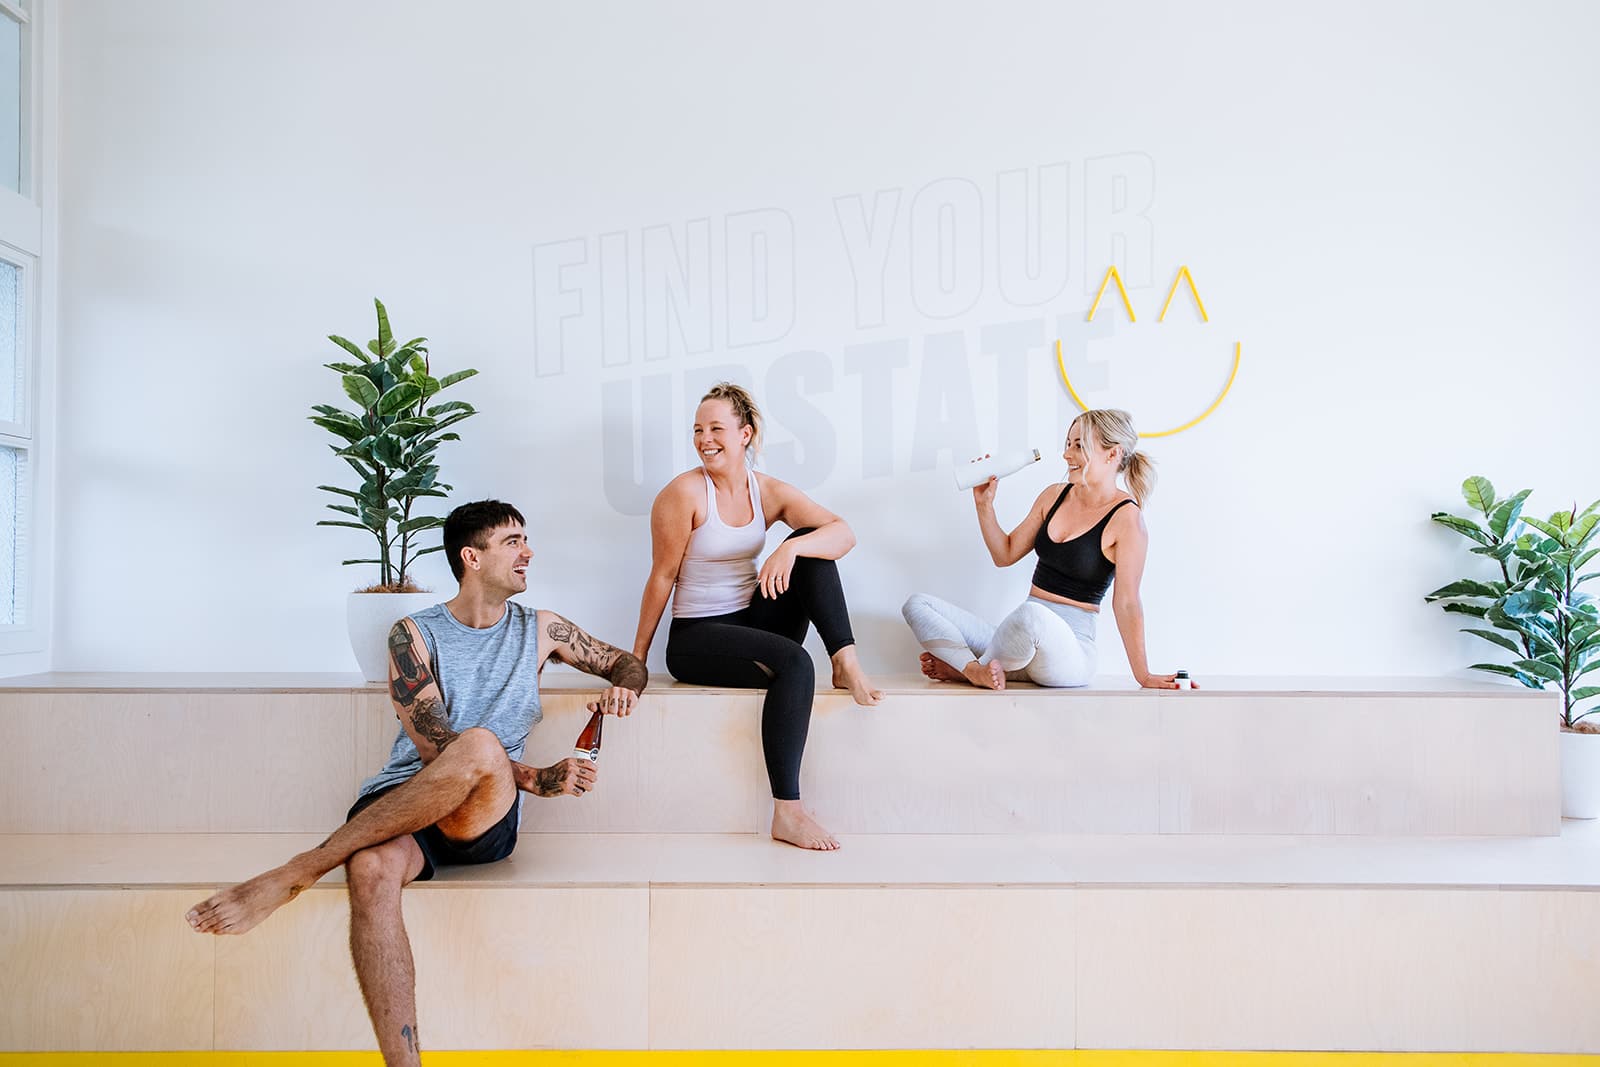 Three friends hang out happily at Upstate Studios in the communal area. Sleek warm wood and bright happy yellow hues create a motivating fitness studio environment.